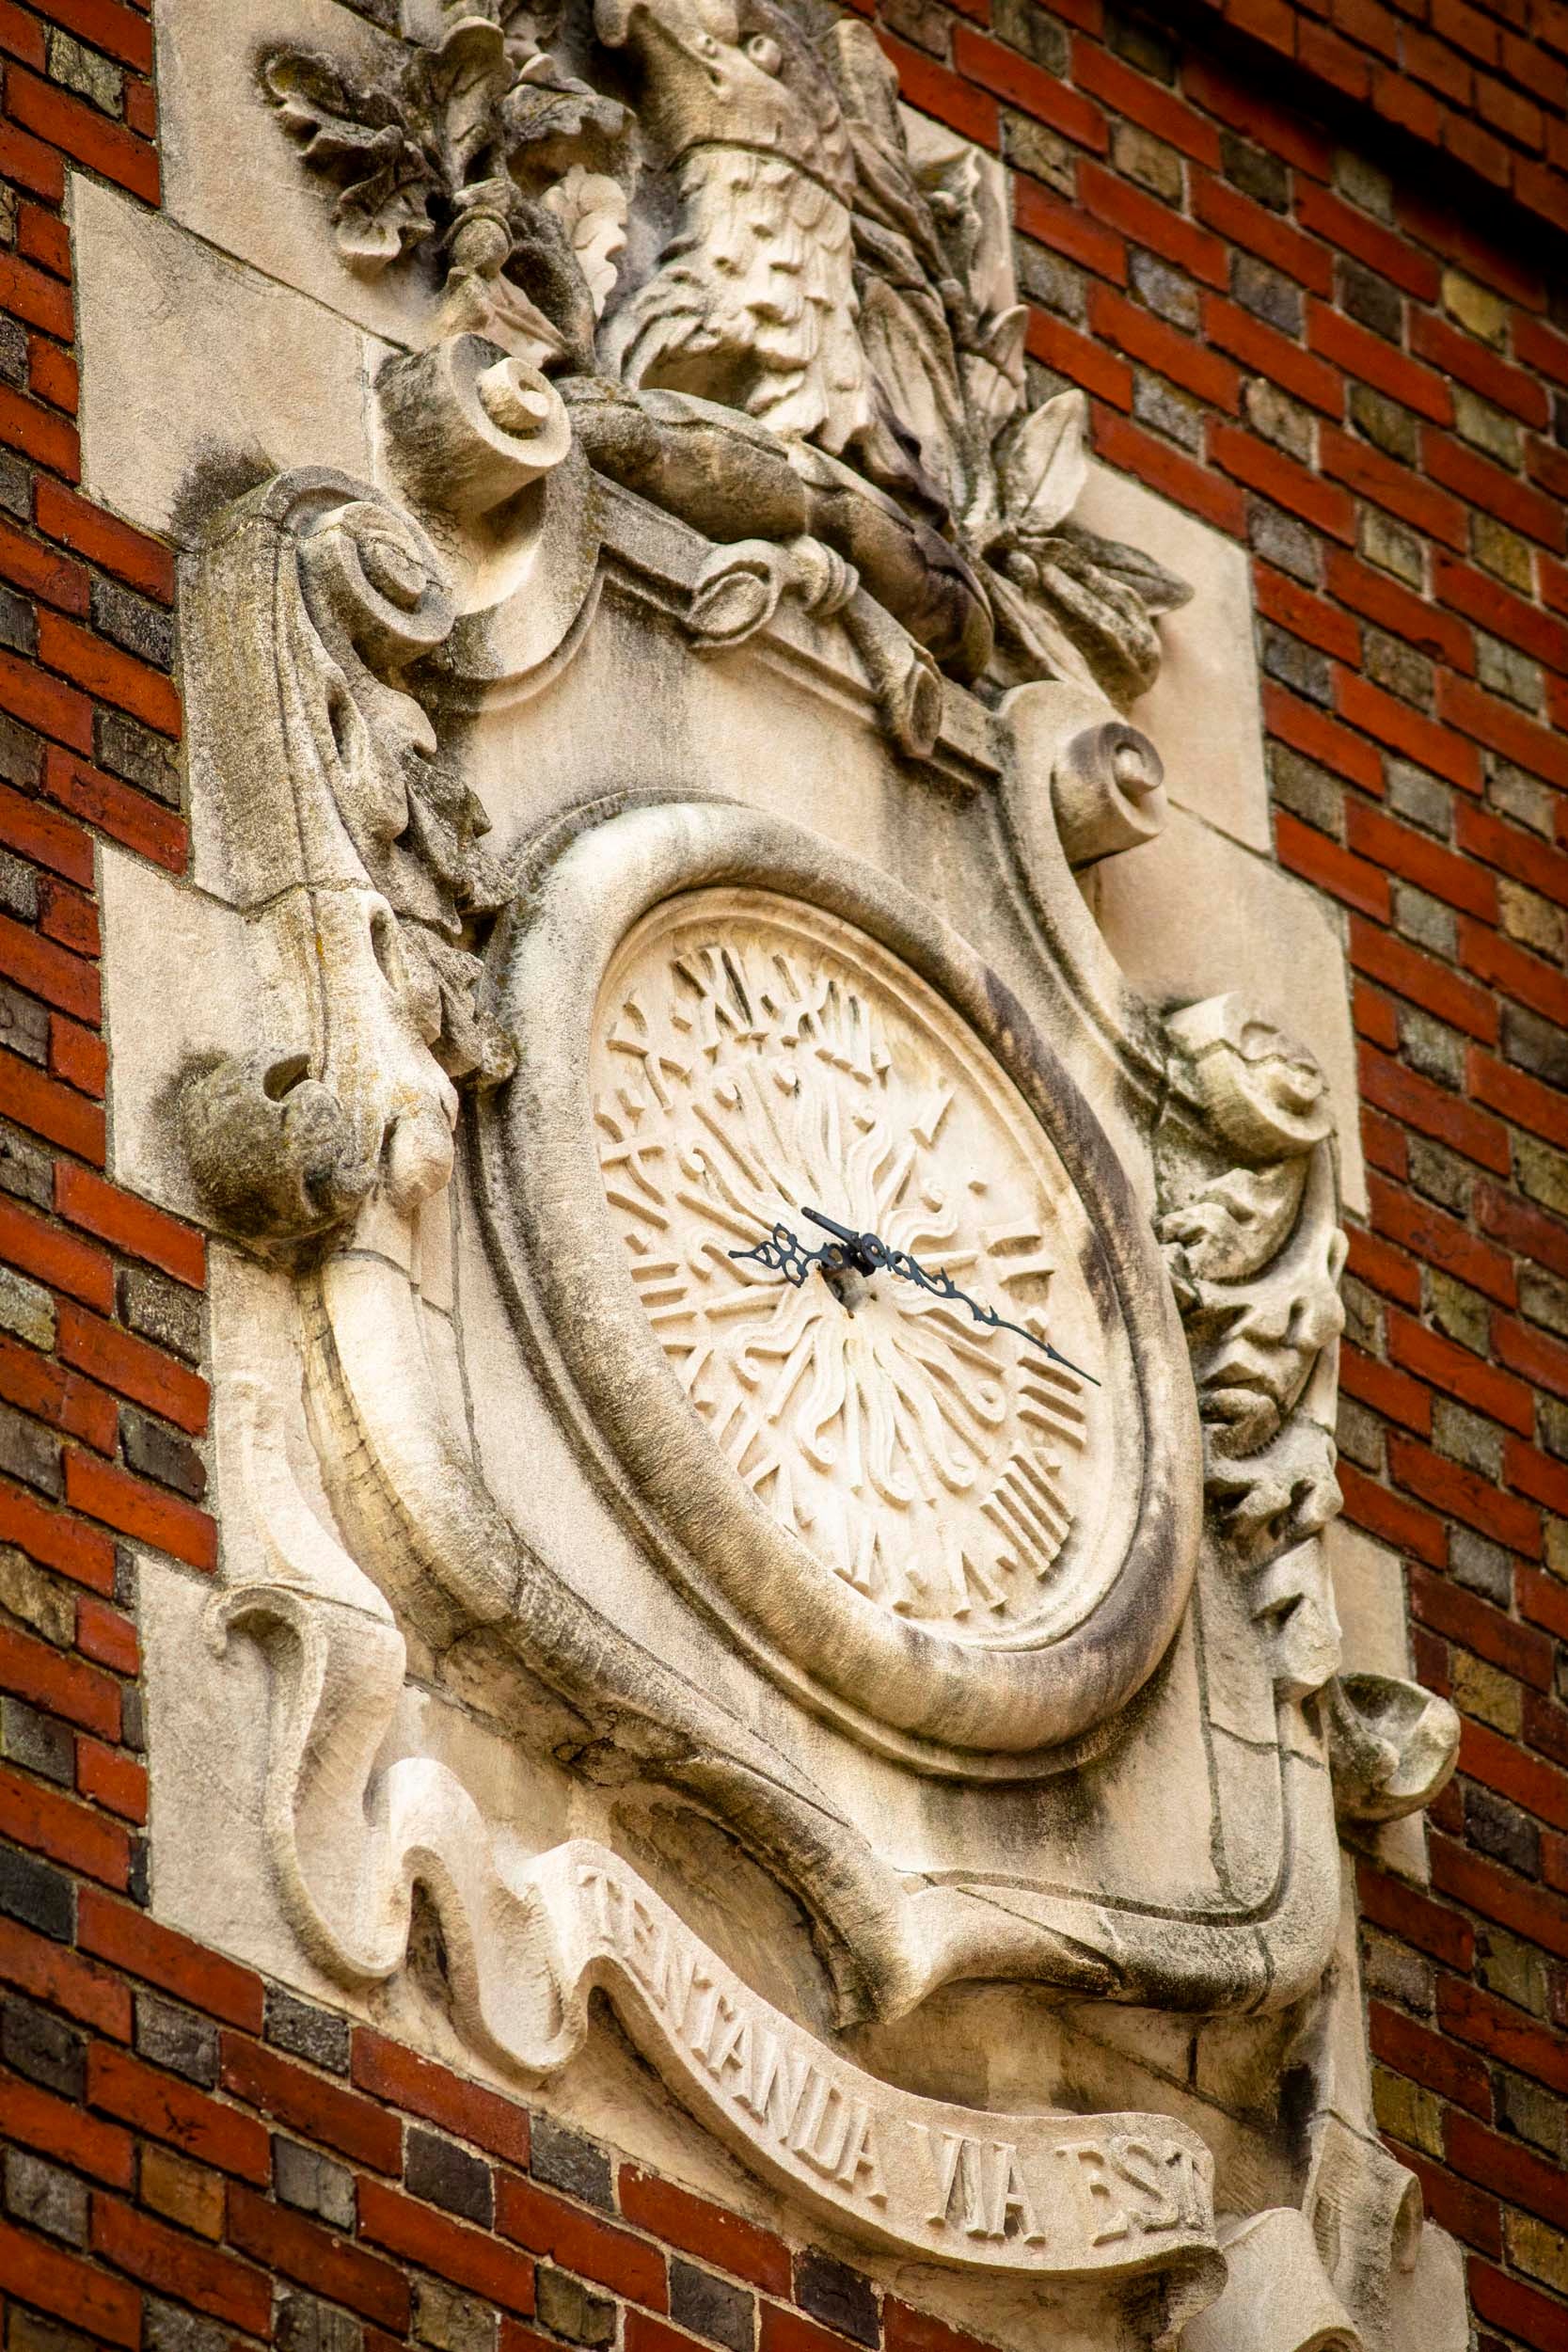 An elaborate clock is pictured on Adams House.